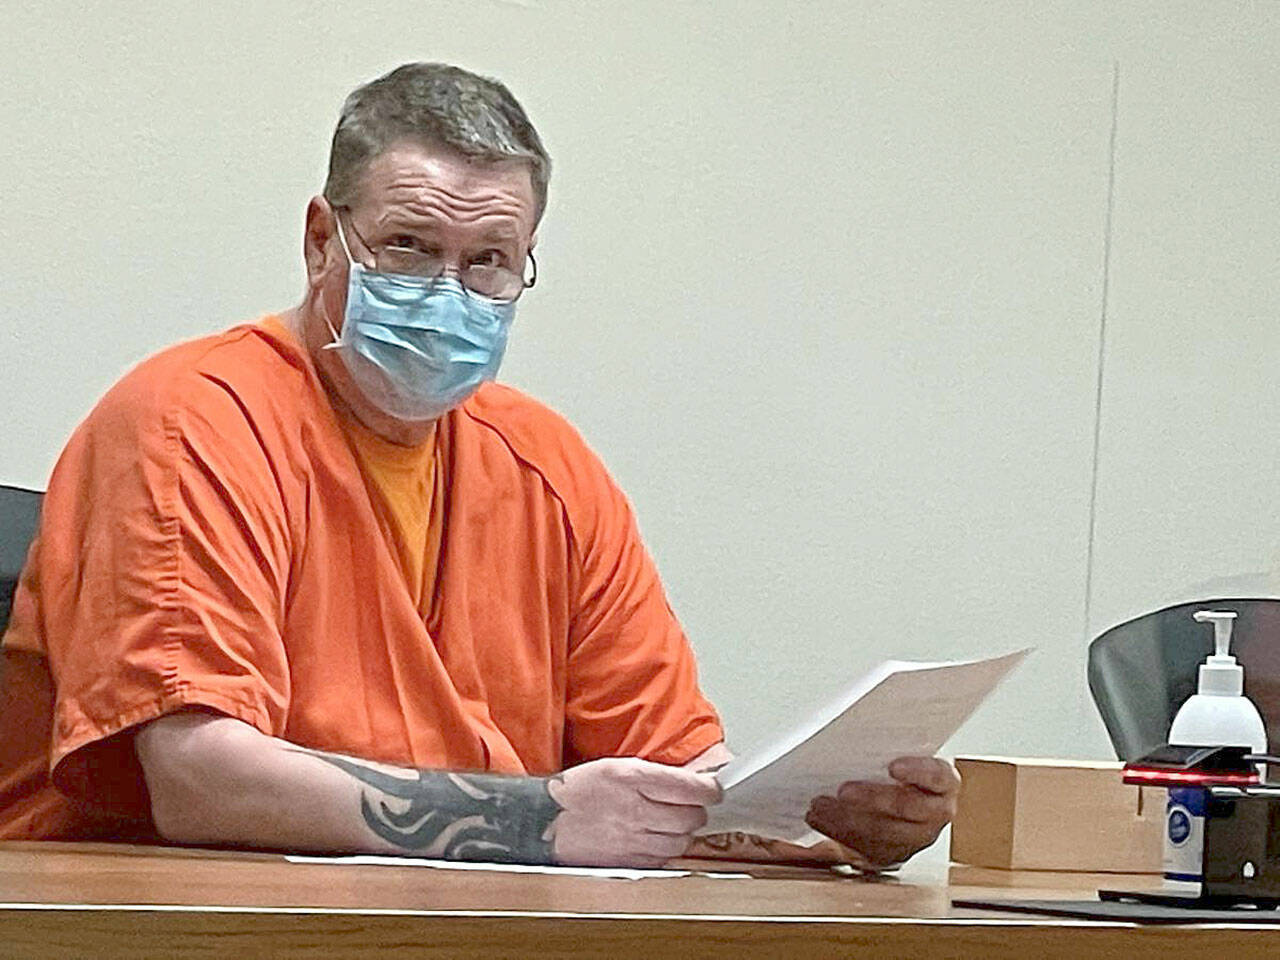 Dennis Bauer, charged with three counts of aggravated first-degree murder, is pictured at an Aug. 17 Clallam County Superior Court hearing. File photo by Paul Gottlieb/Olympic Peninsula News Group